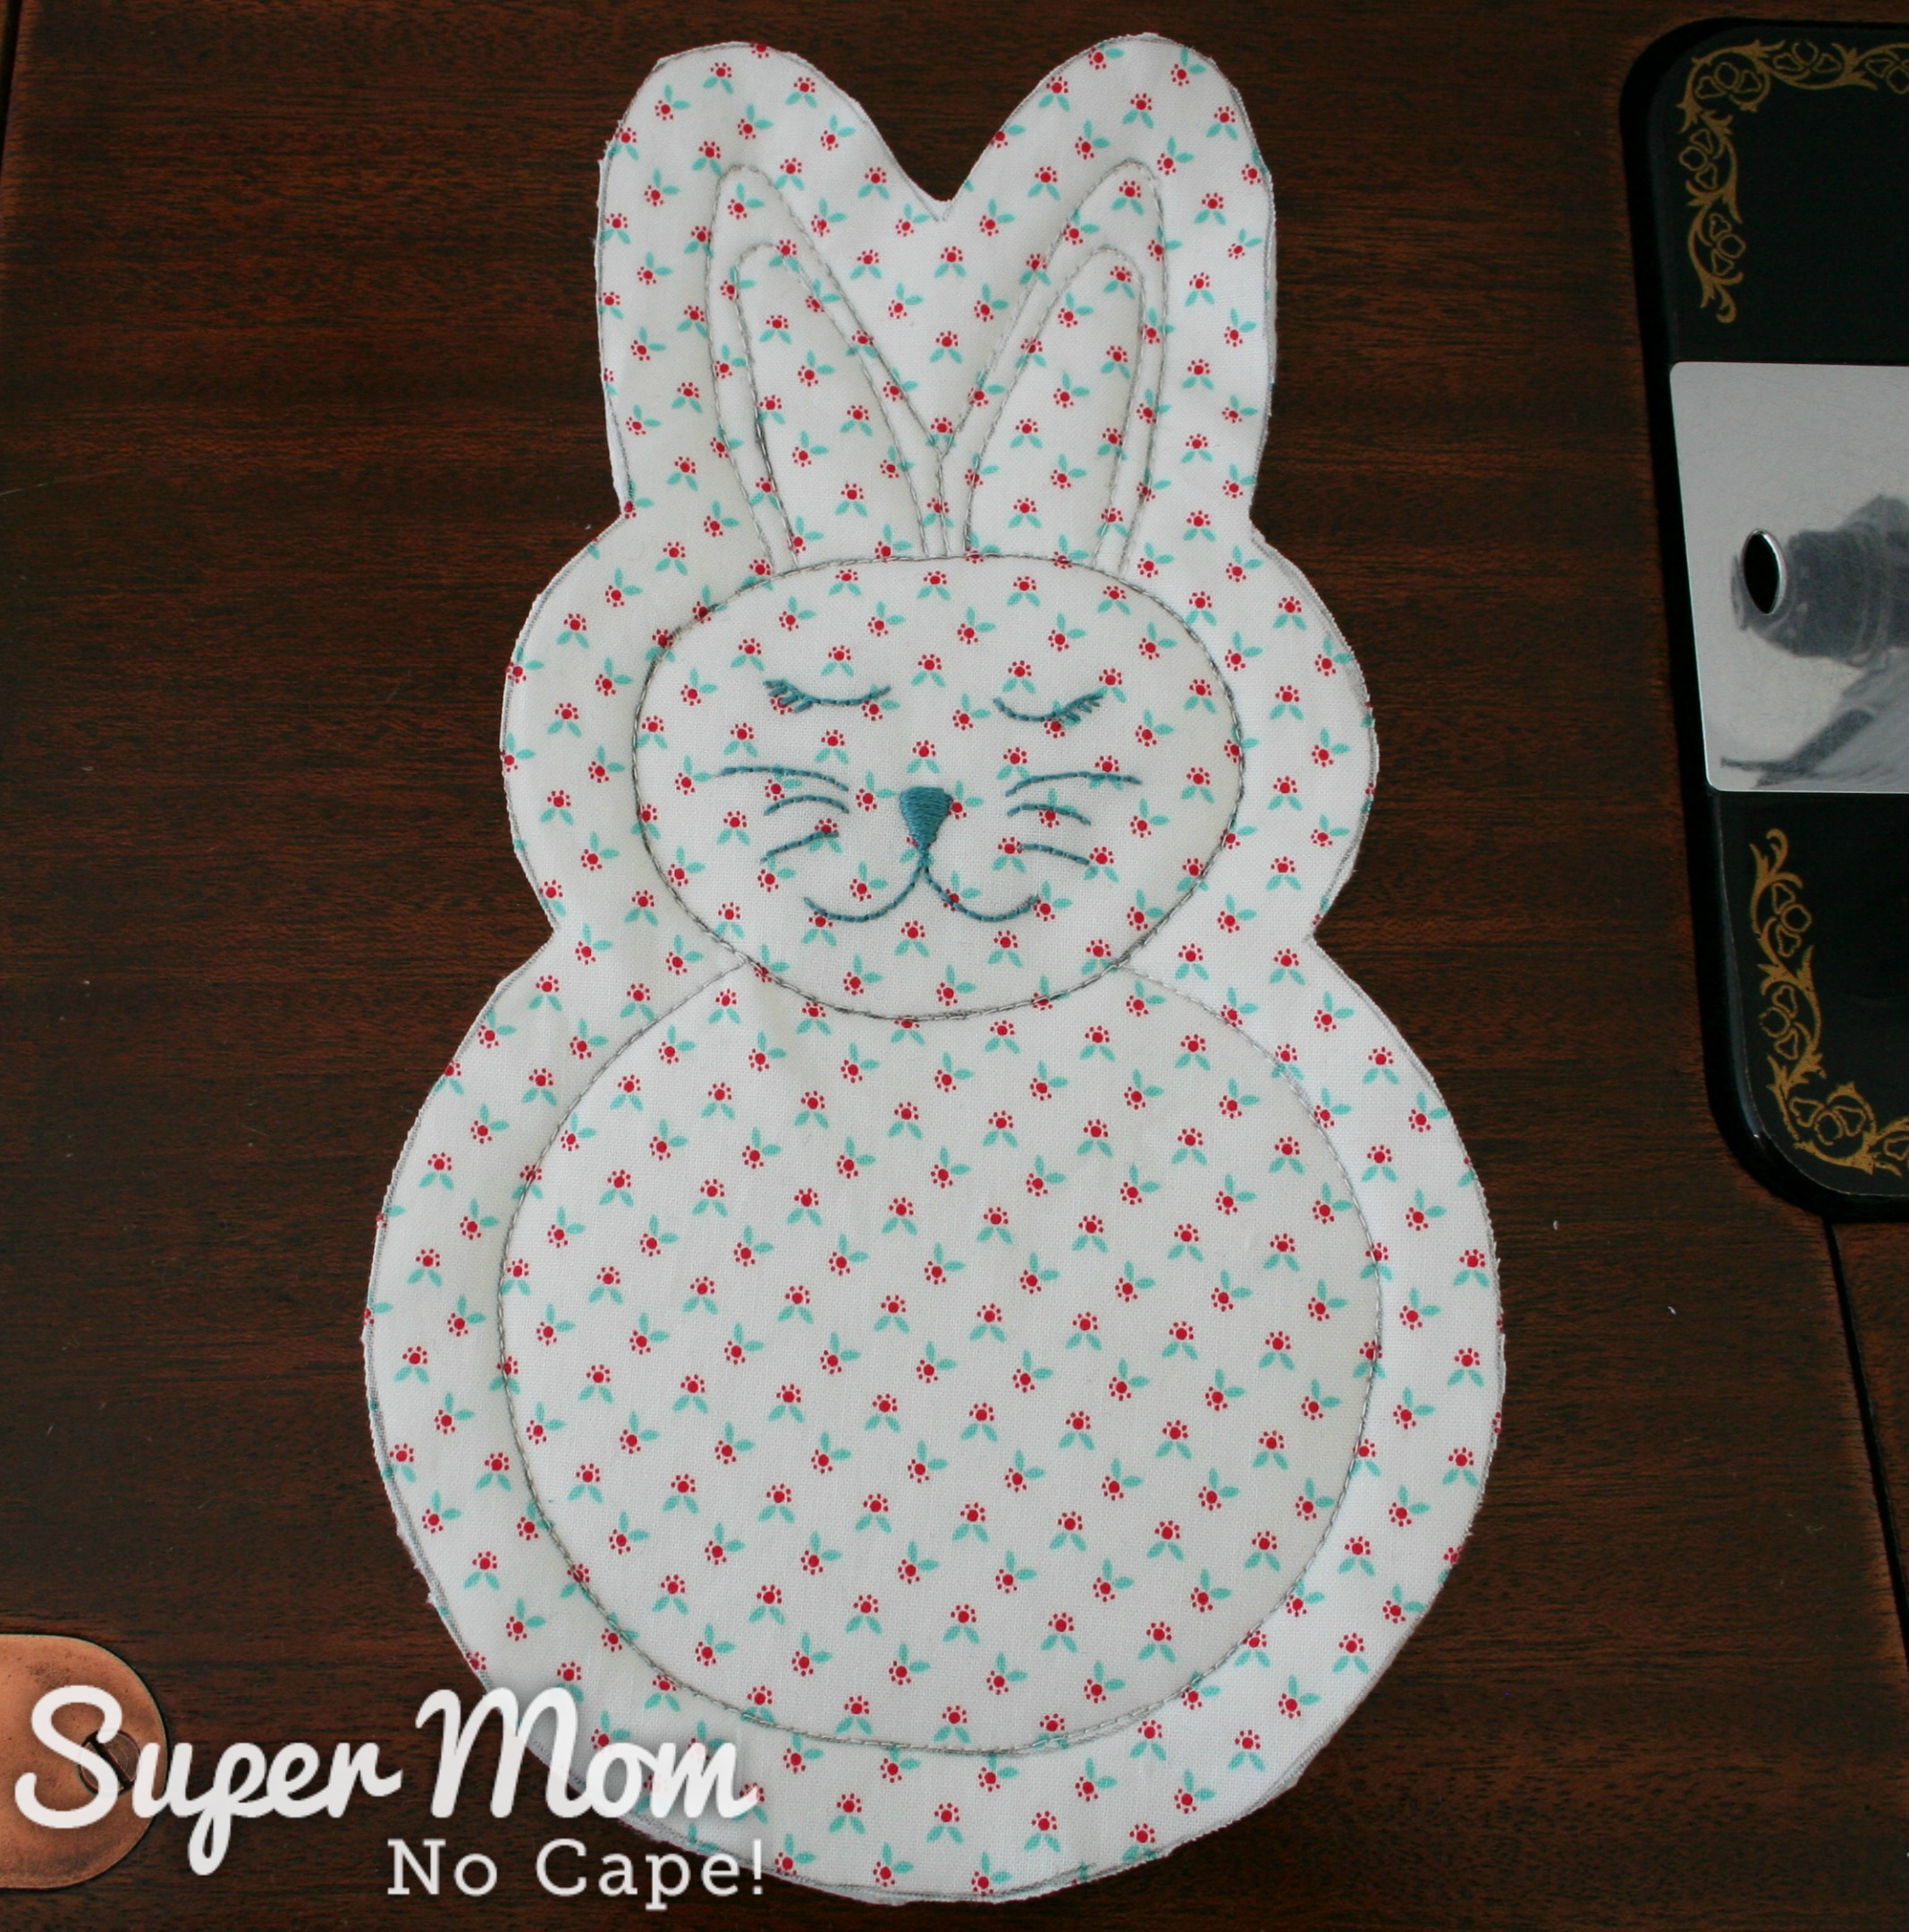 Rag quilt bunny after being cut out of fabric layers